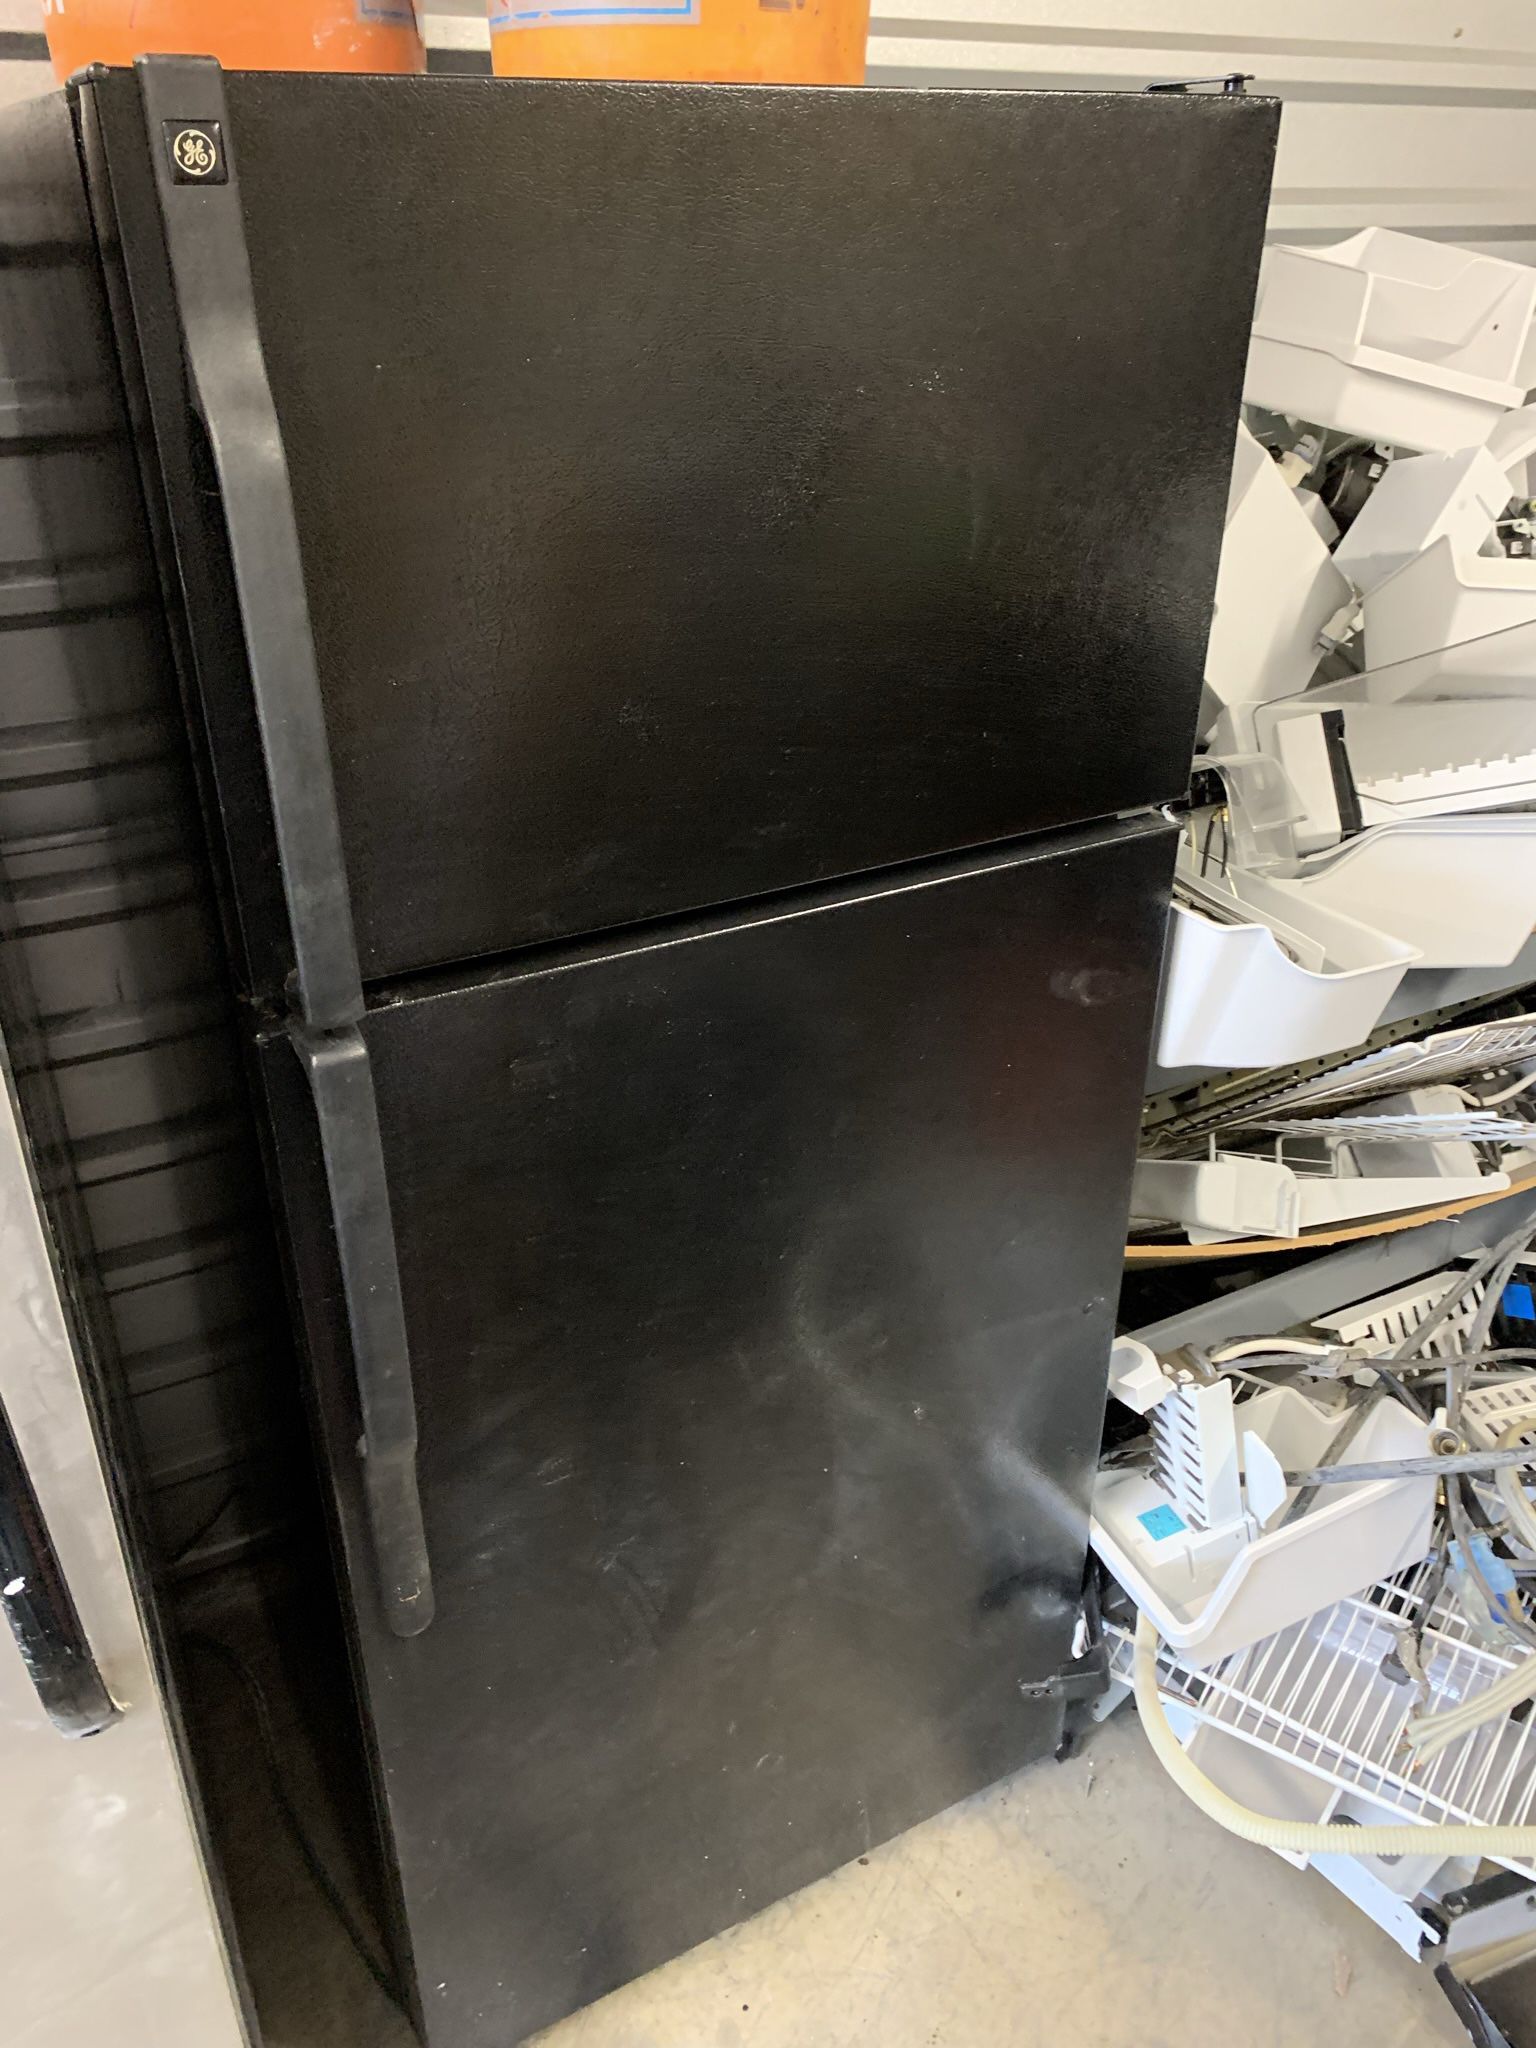 Black GE Refrigerator  Clean And In Good Condition  